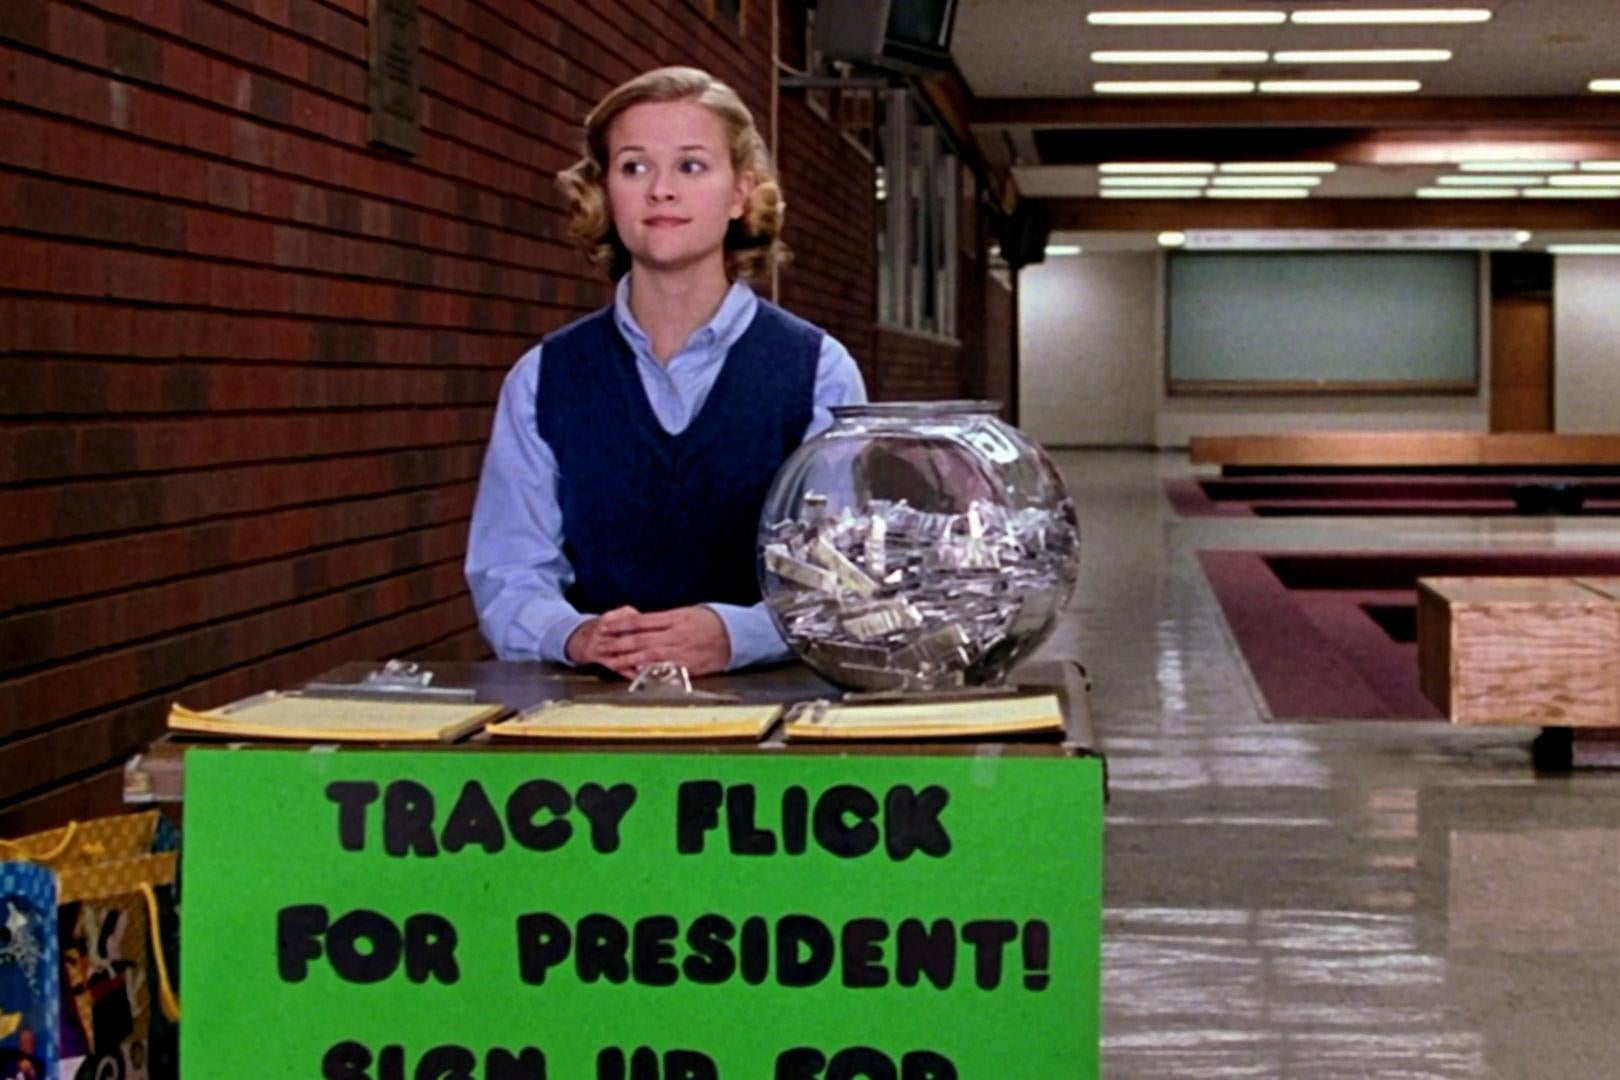 A young Reese Witherspoon sits as a student at a table in a High School hallway with a sign on it that says "Tracy Flick for president!" and some sign up sheets on the table. 